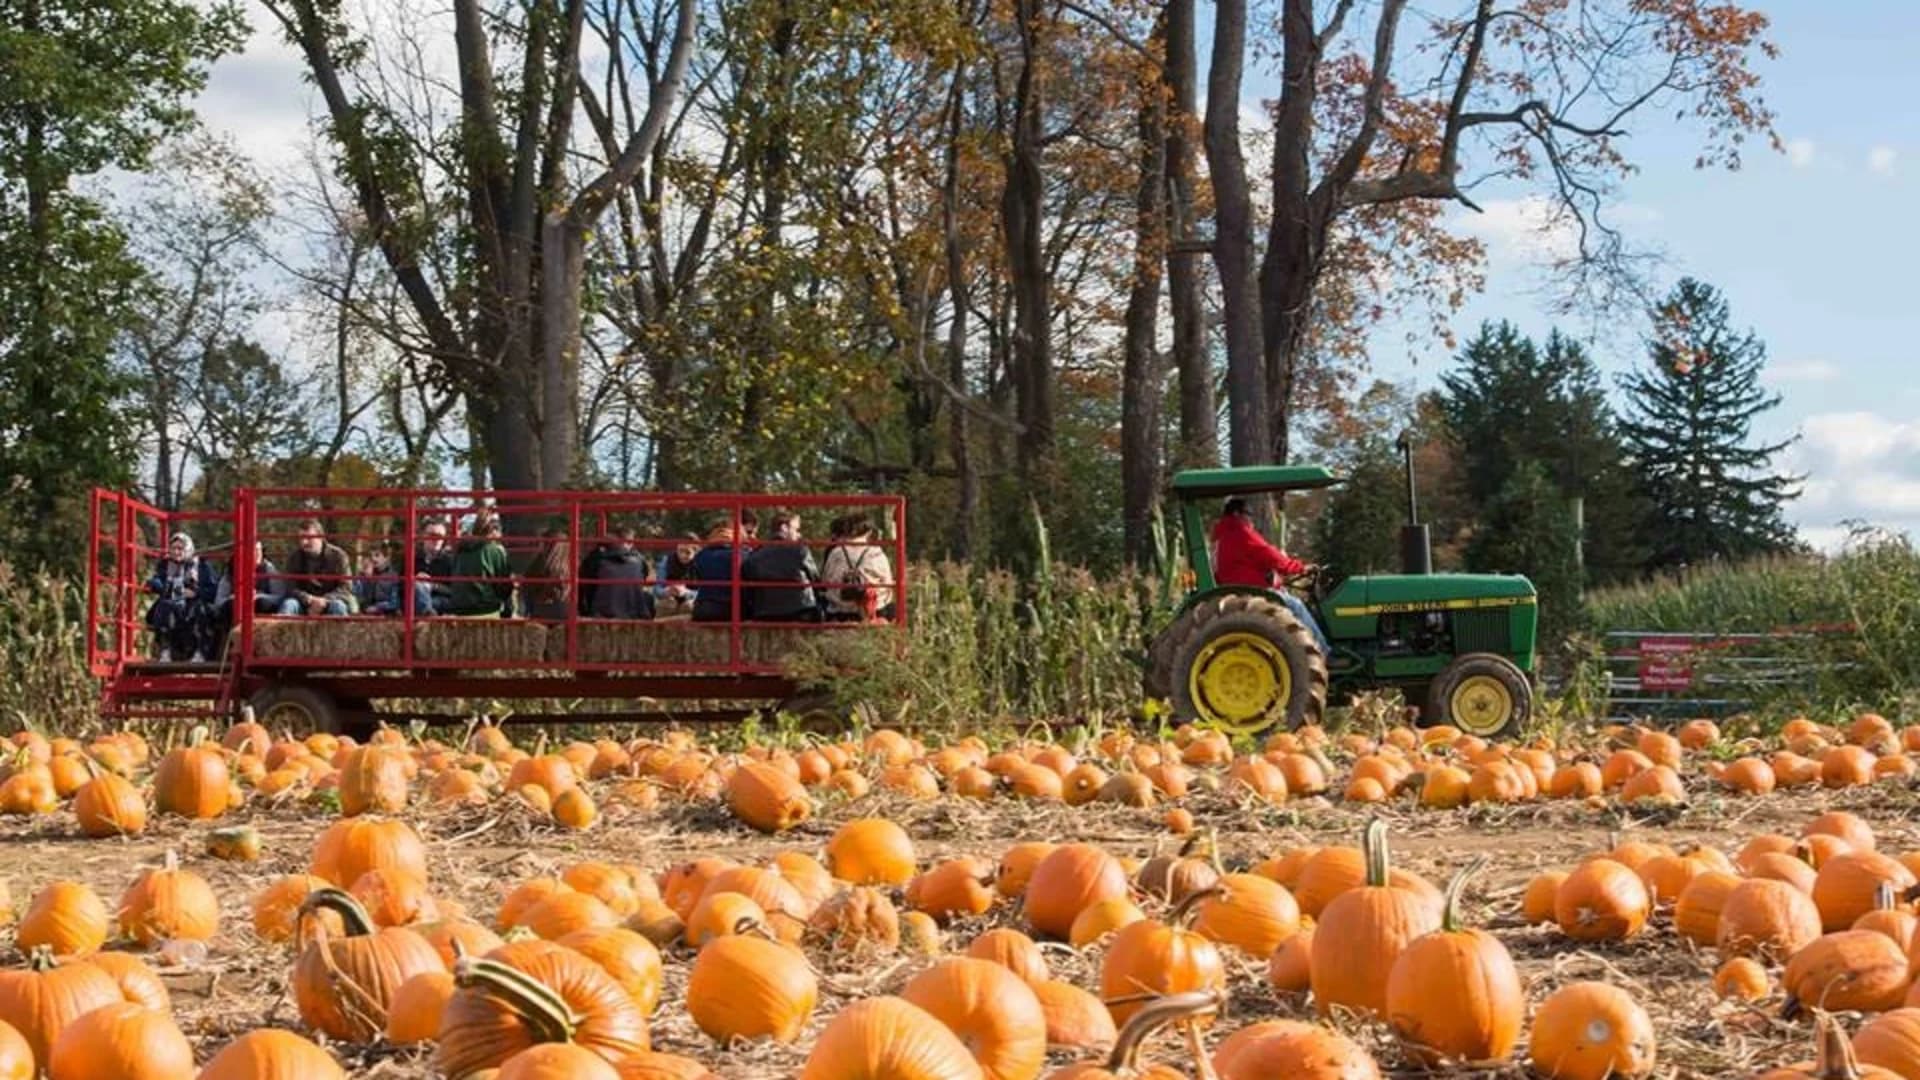 Guide: Where to go pumpkin picking in New Jersey